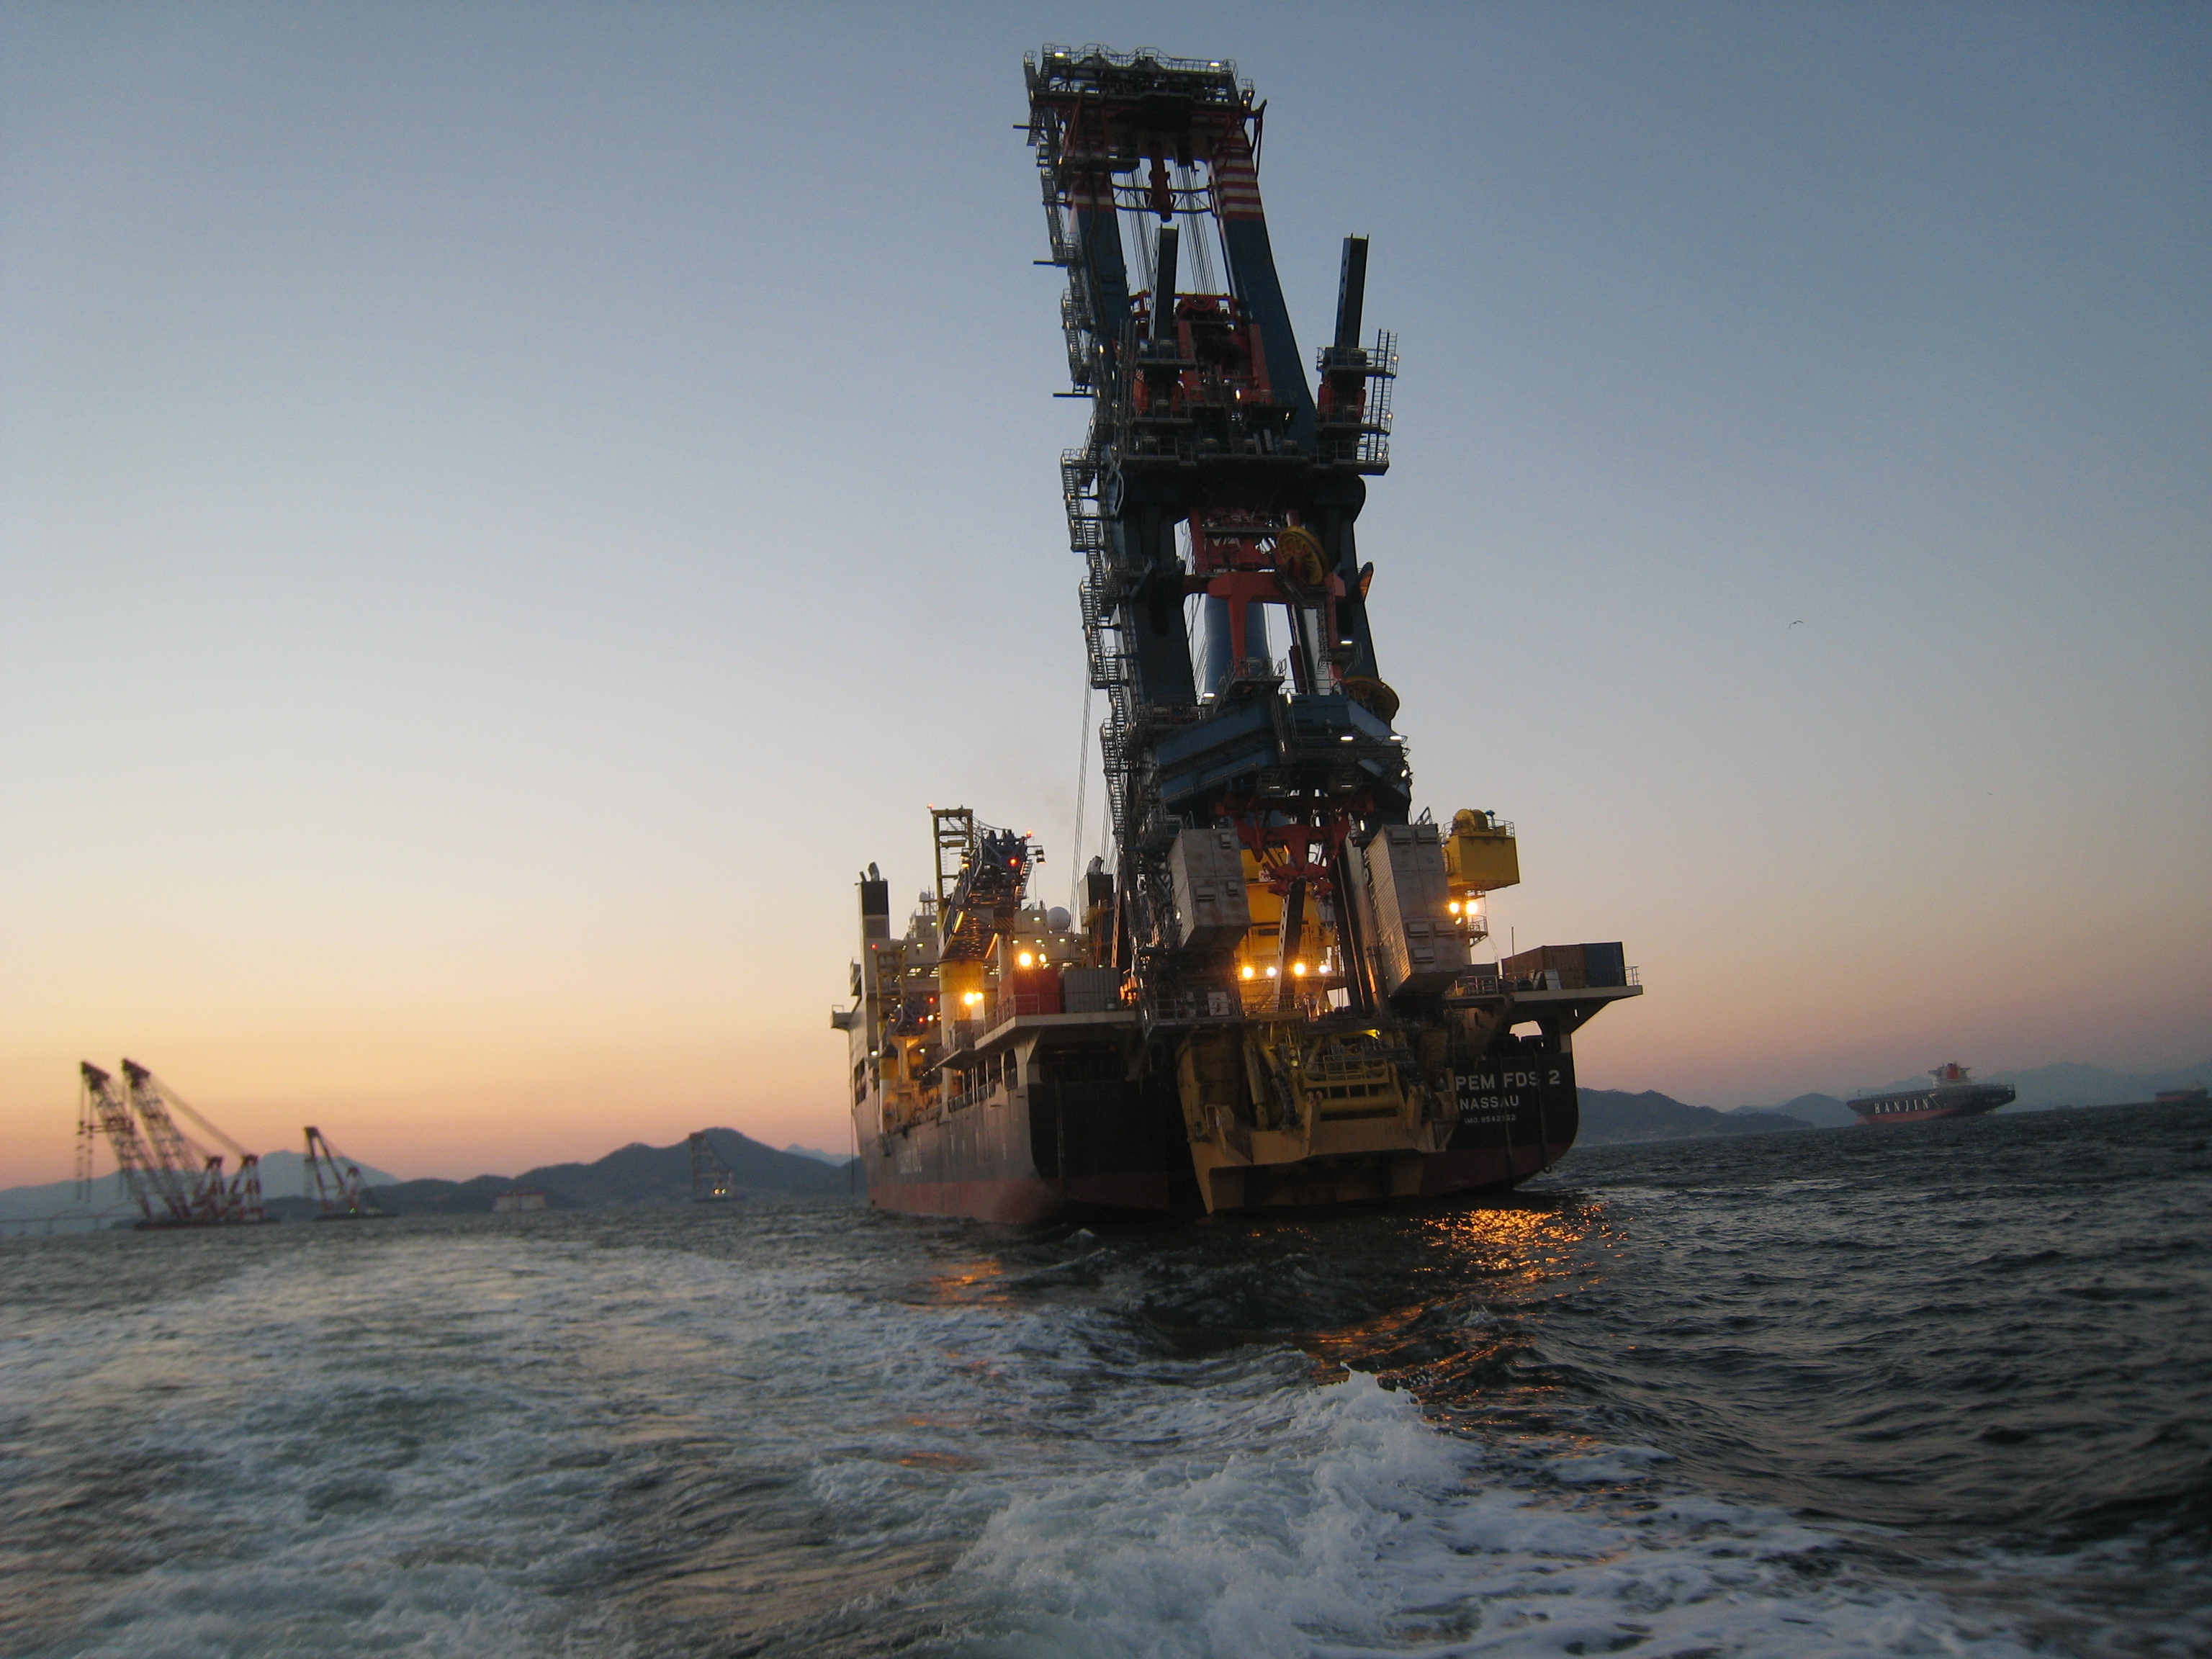 Vessel with J-Lay tower at sea